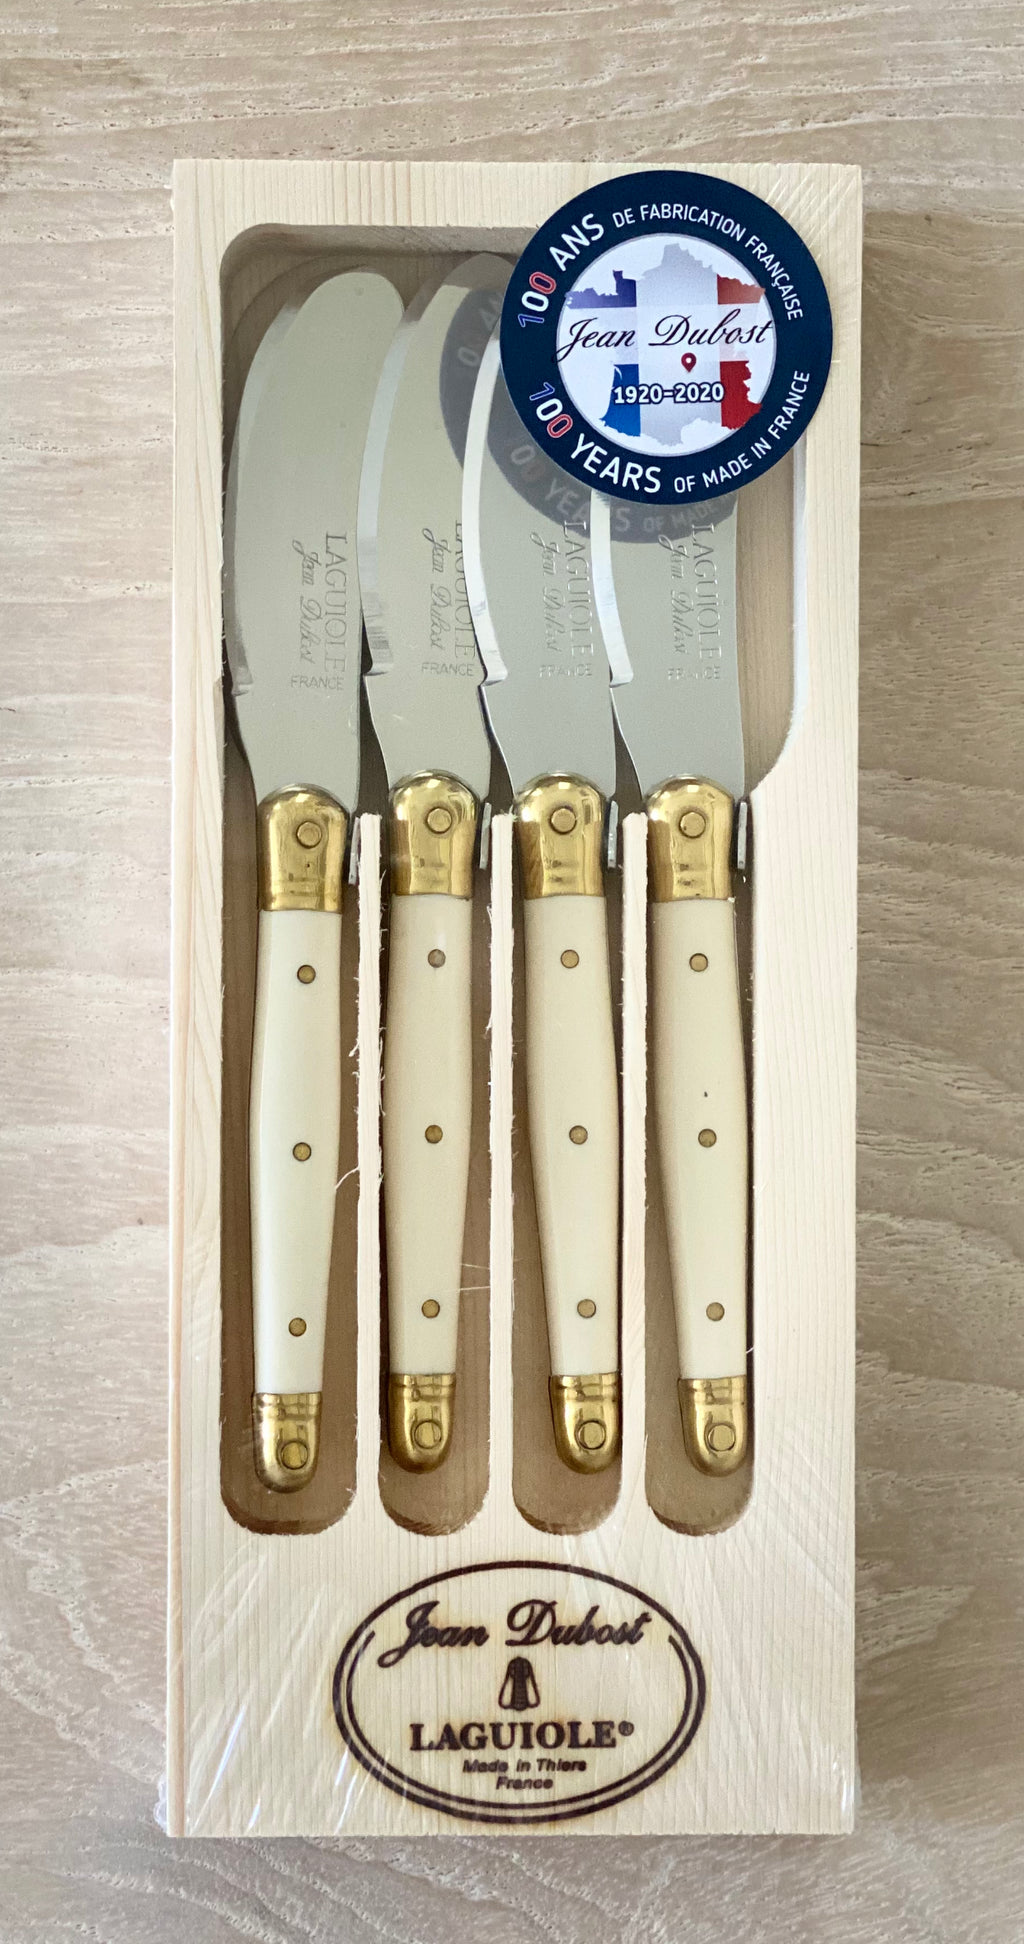 Laguiole Set of 4 Spreaders in Wooden Box